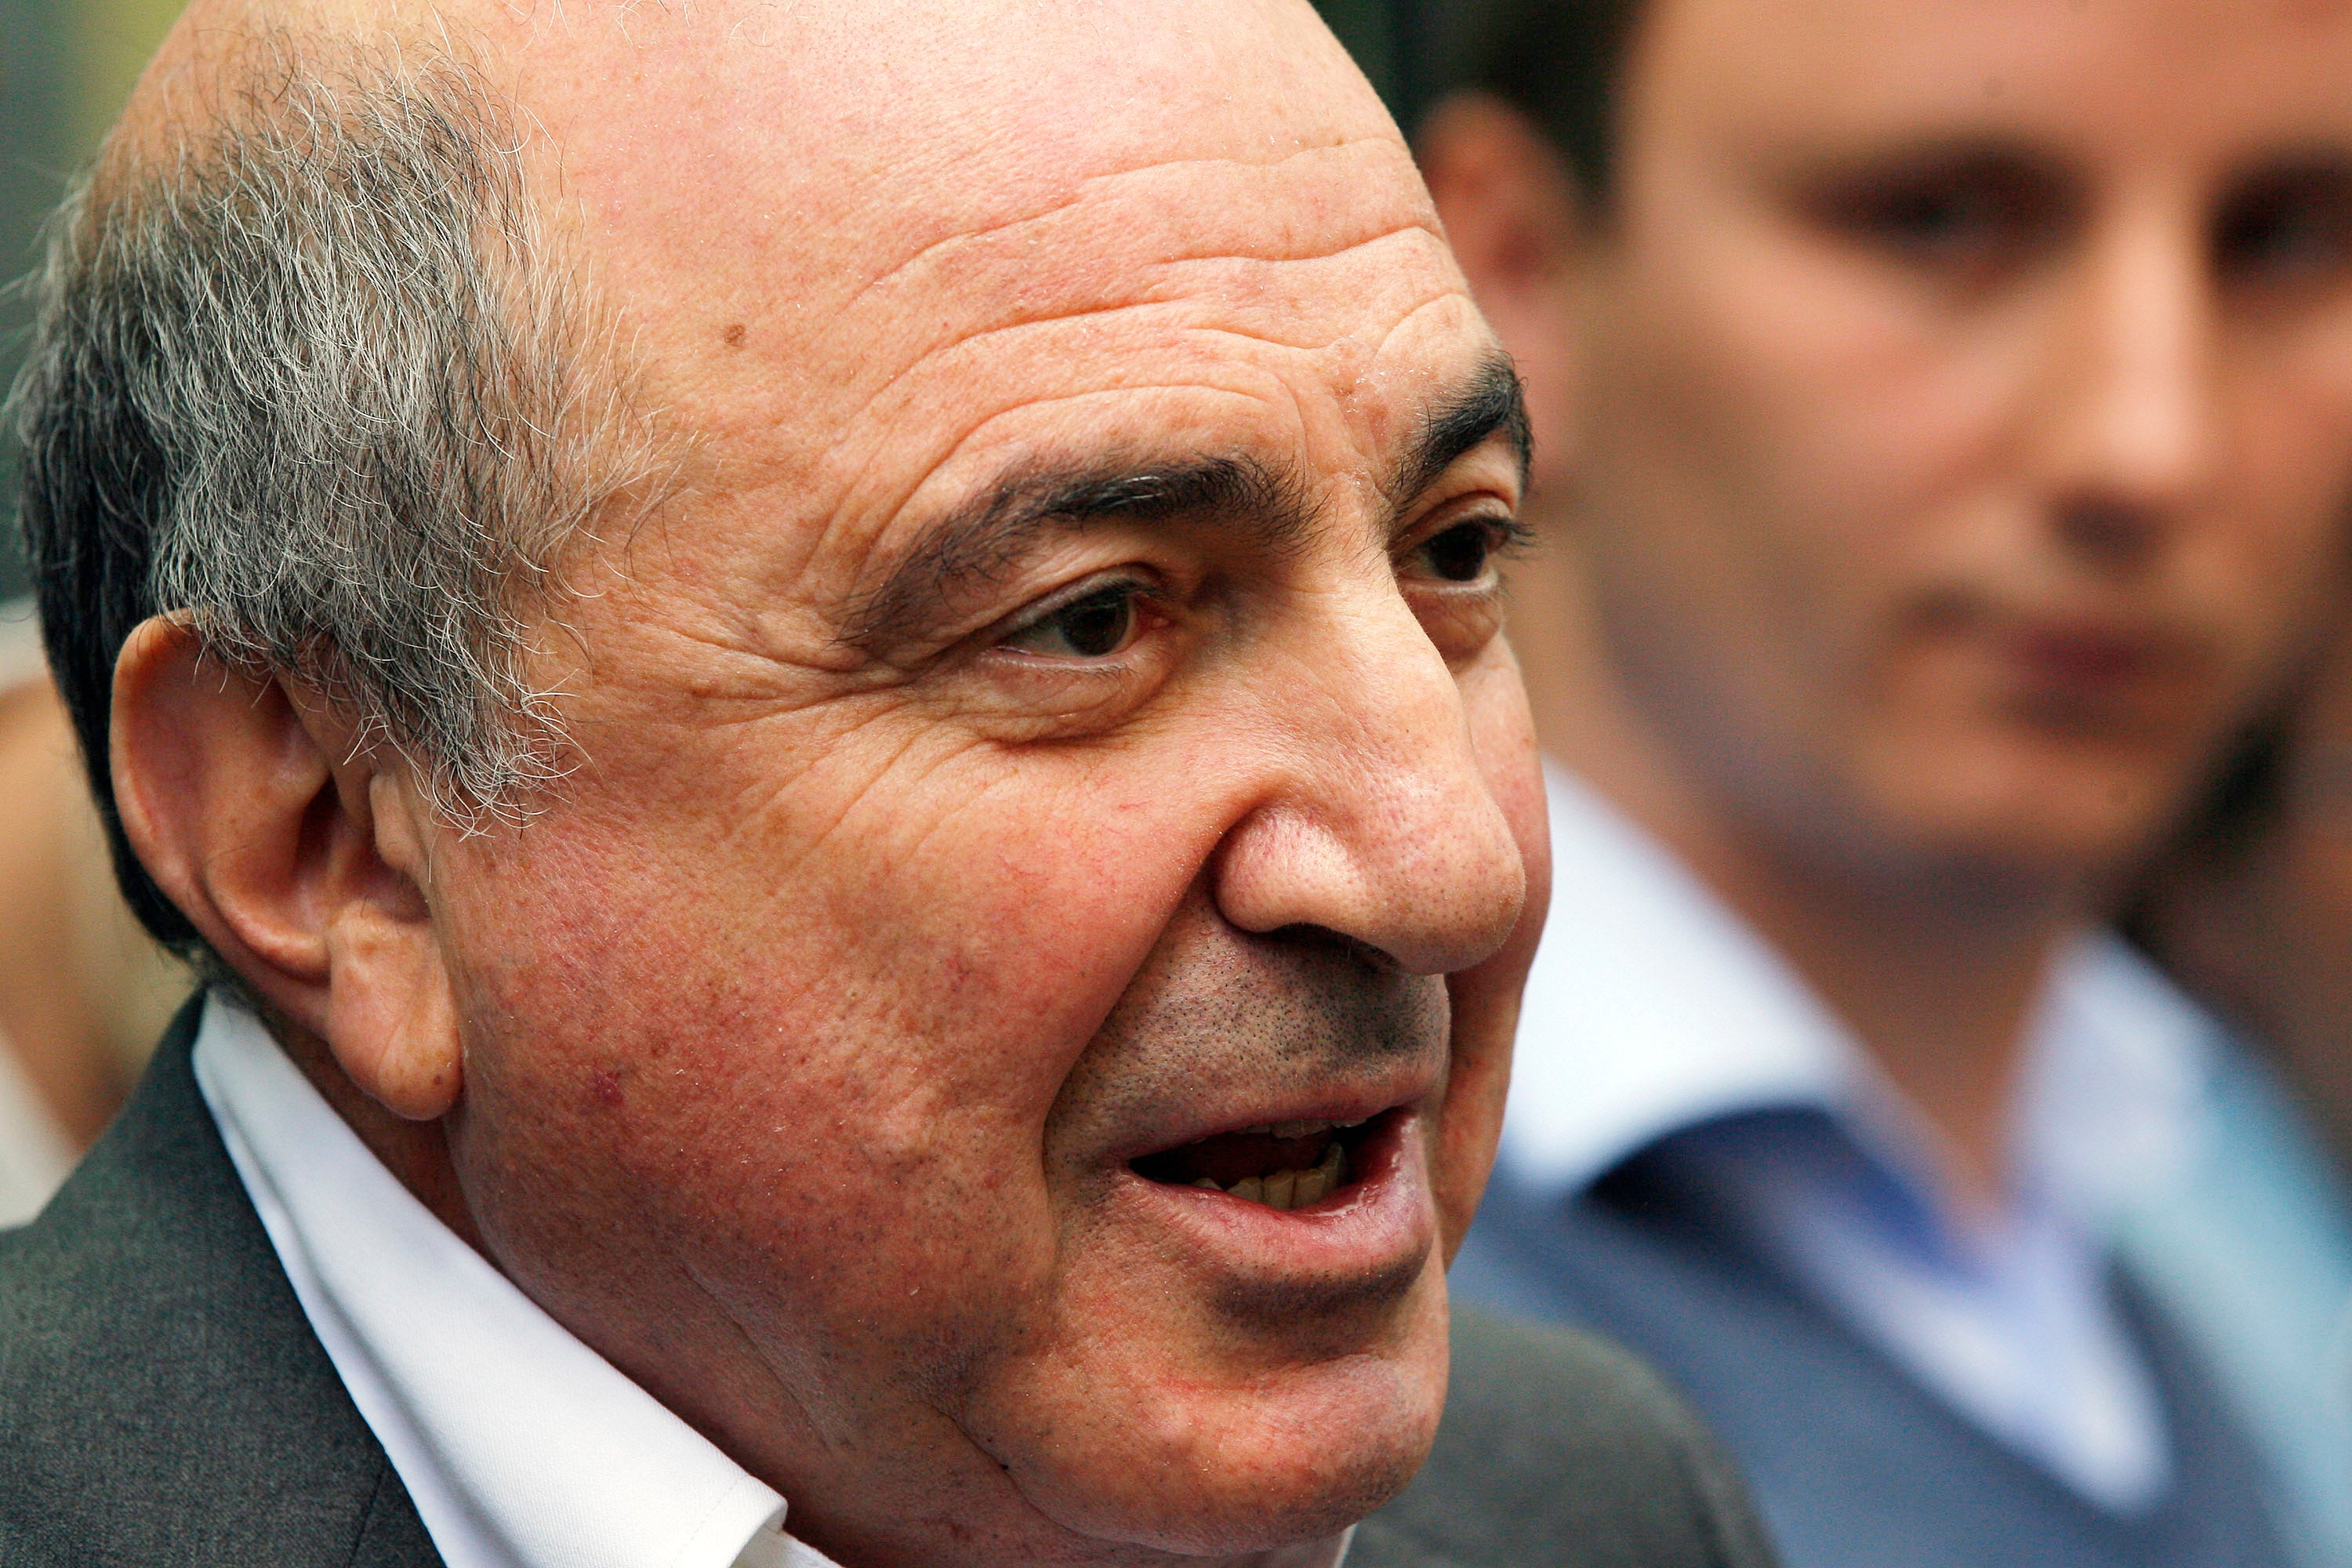 The cause of death for the ex-oligarch Boris Berezovsky remains unclear